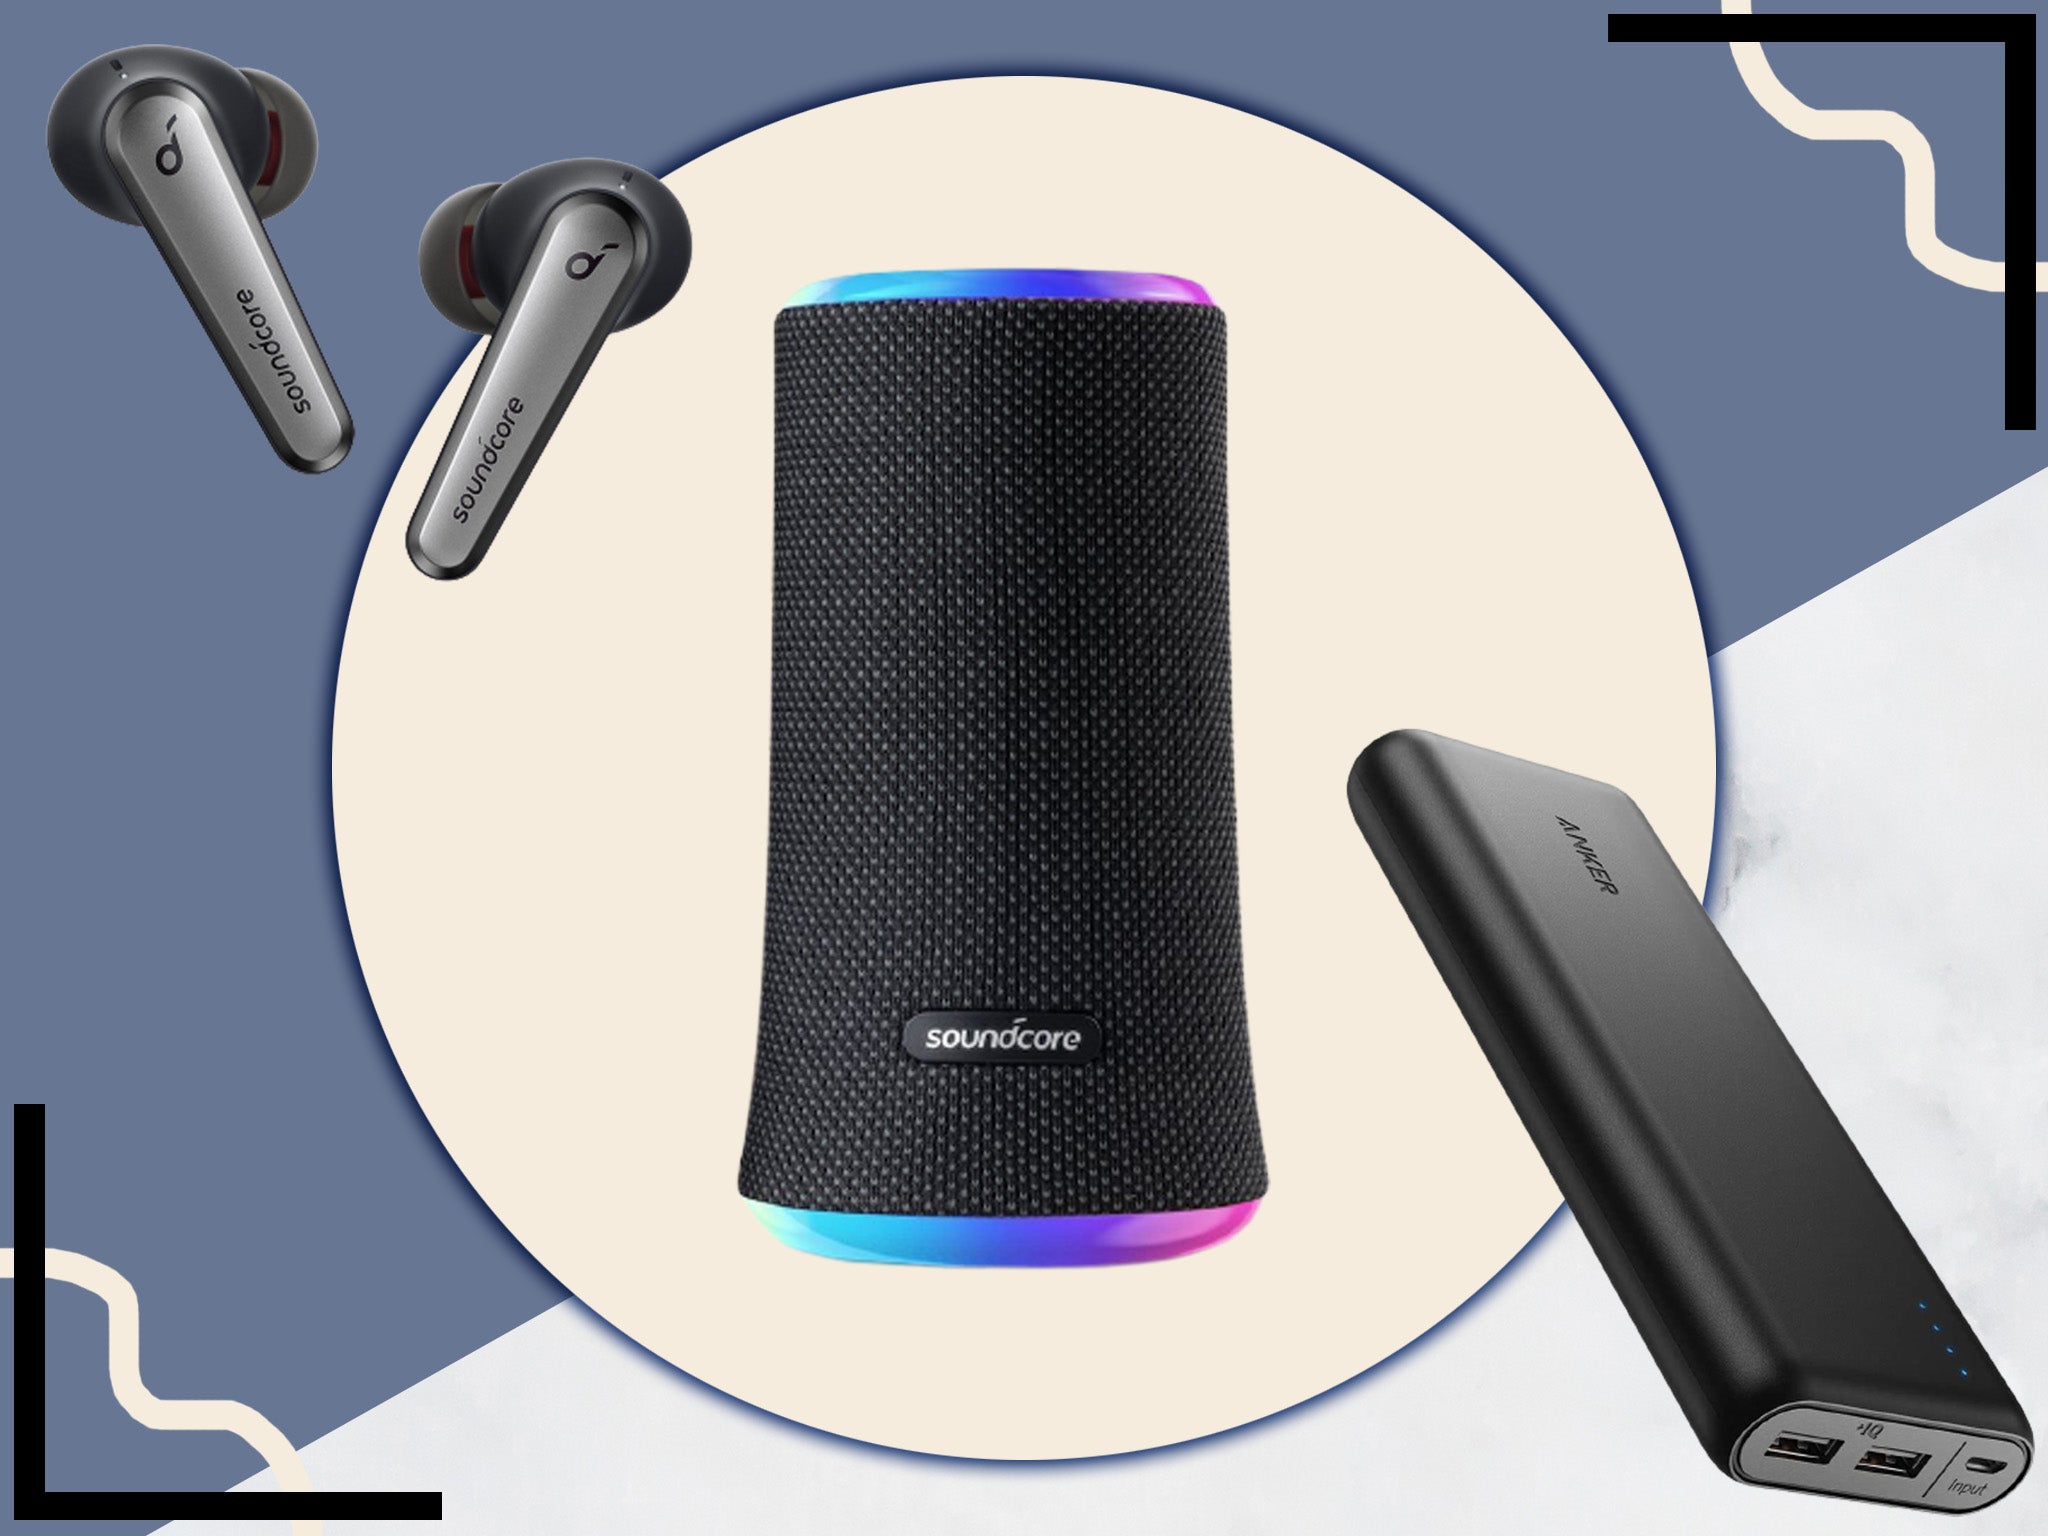 Pick up blade kulstof ly Anker buying guide: Soundcore speakers, power banks and more | The  Independent